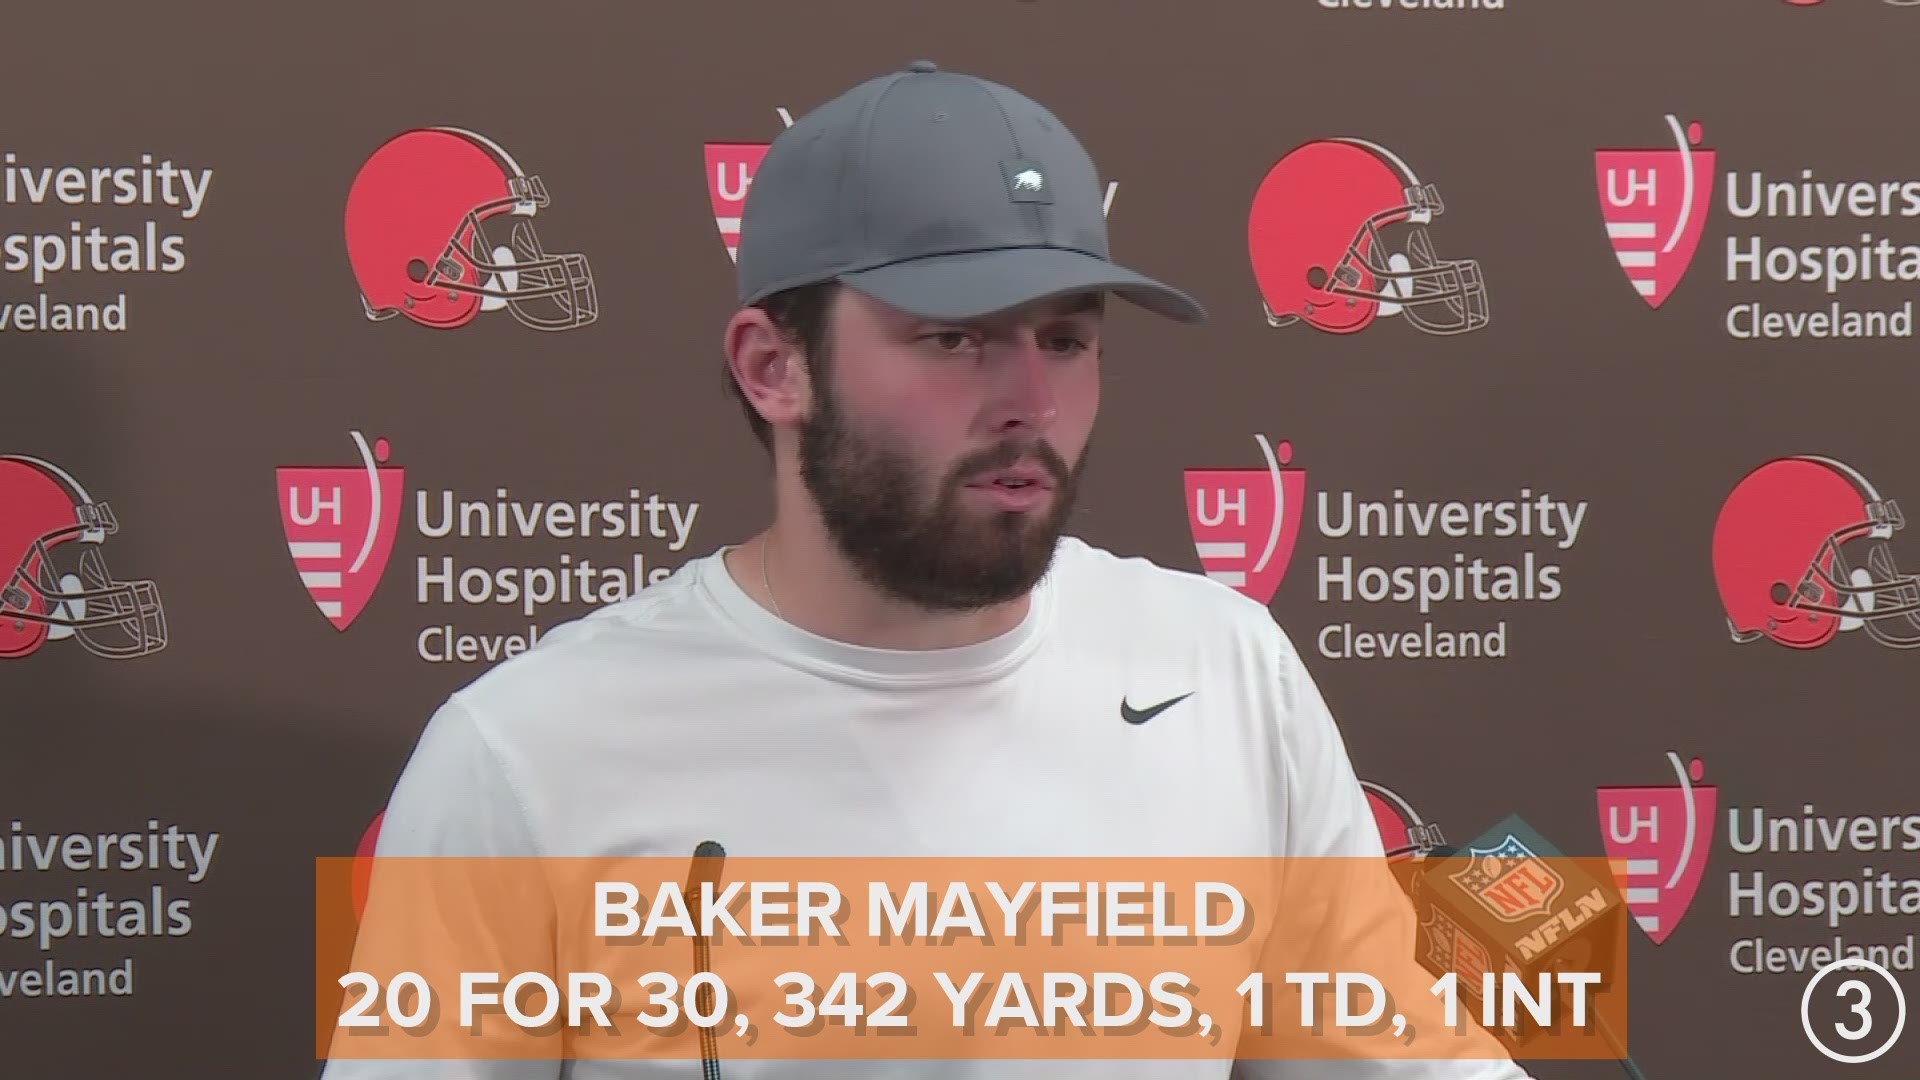 Following the Cleveland Browns' 40-25 victory over the Baltimore Ravens on Sunday, Baker Mayfield declined to discuss his social media feud with Antonio Brown.